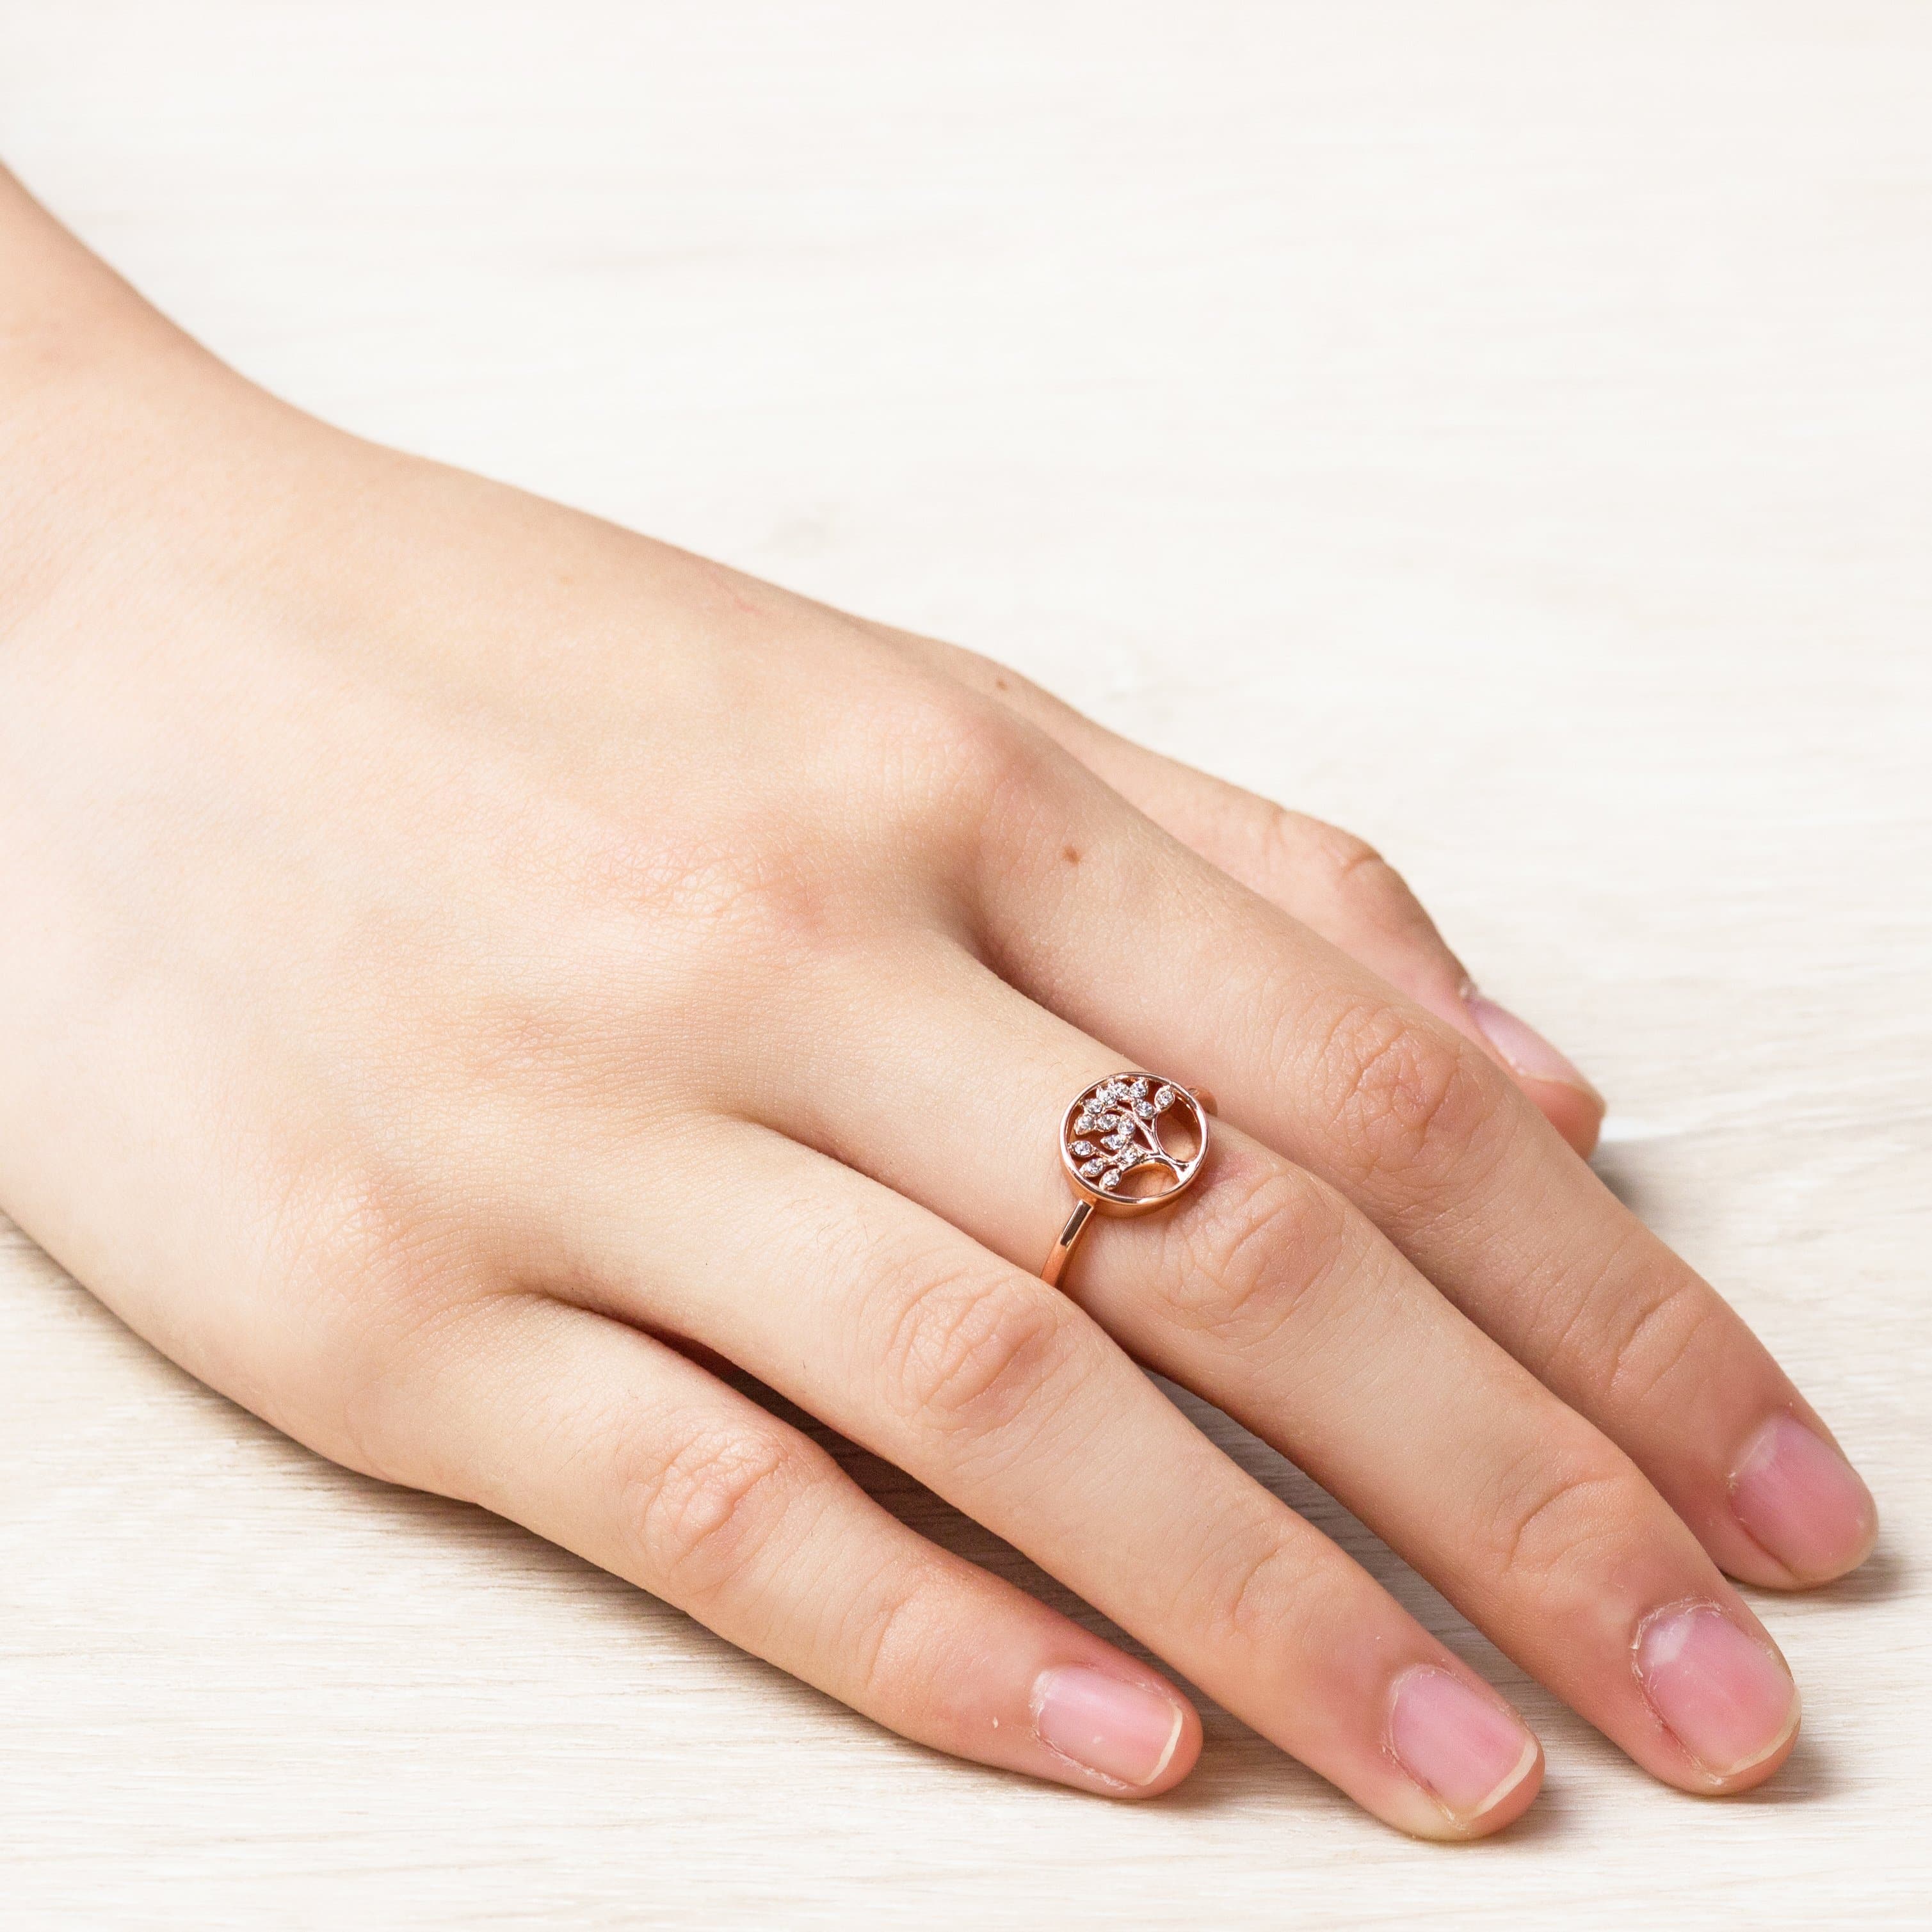 Rose Gold Plated Tree of Life Ring Created with Zircondia® Crystals